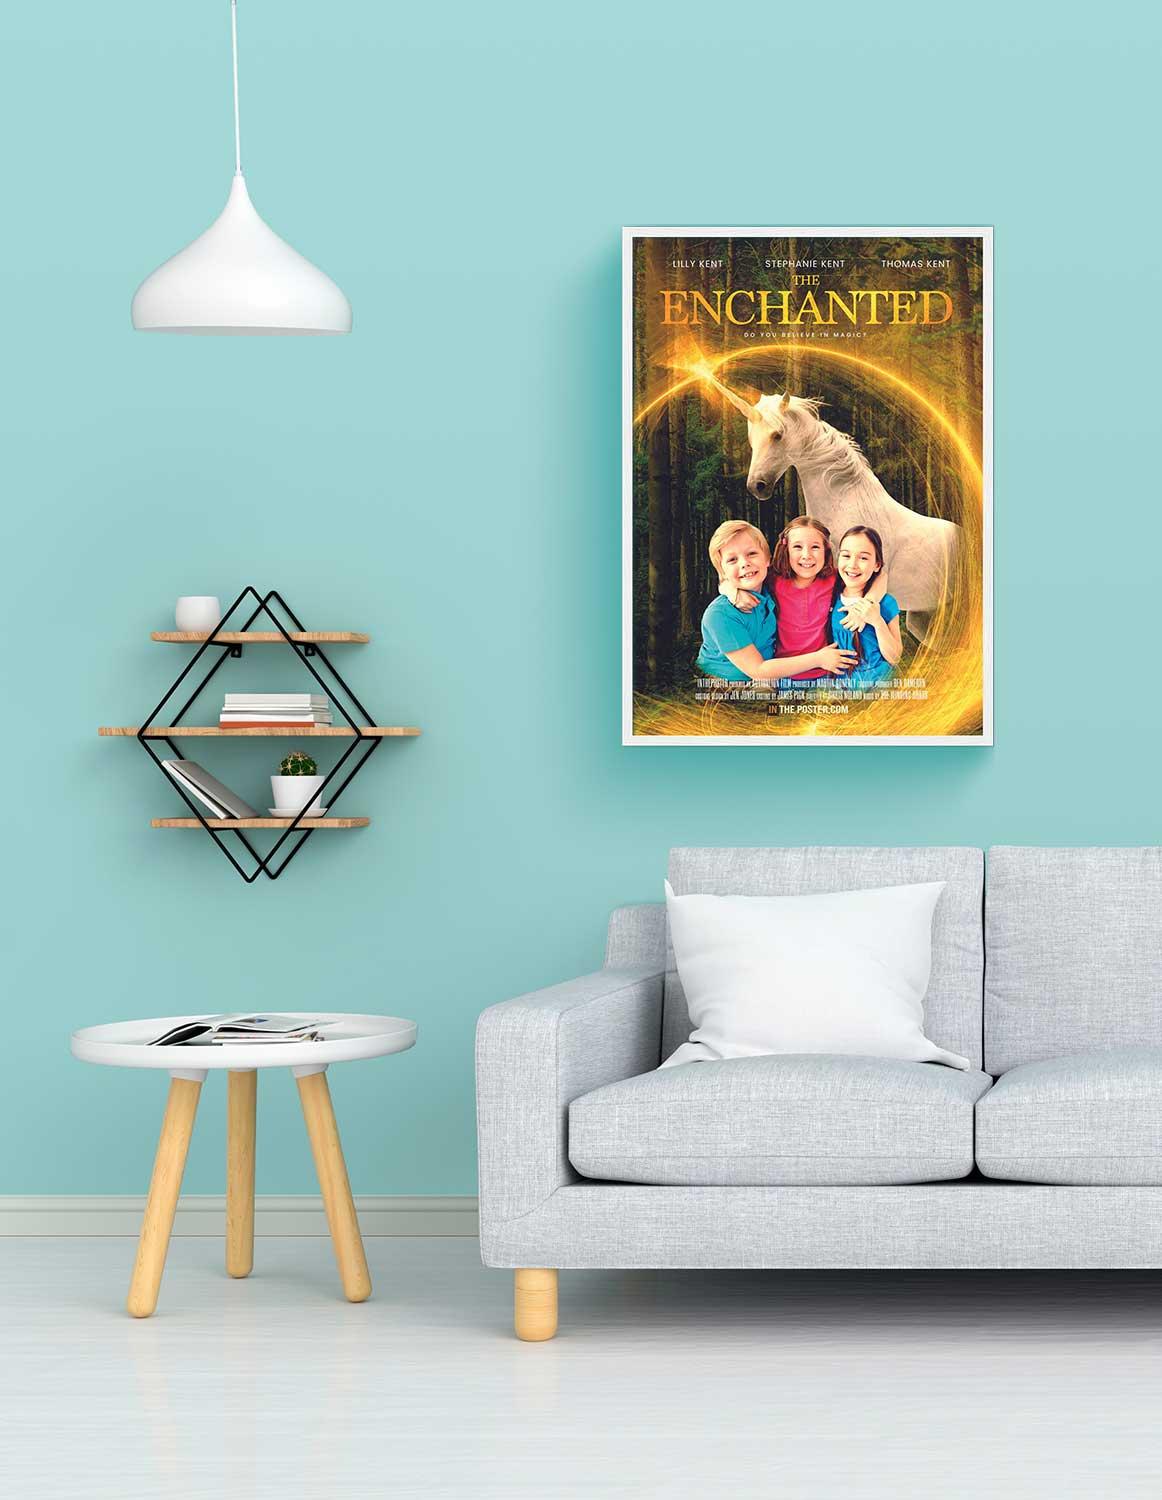 A unicorn movie poster in a regular white frame above a grey sofa